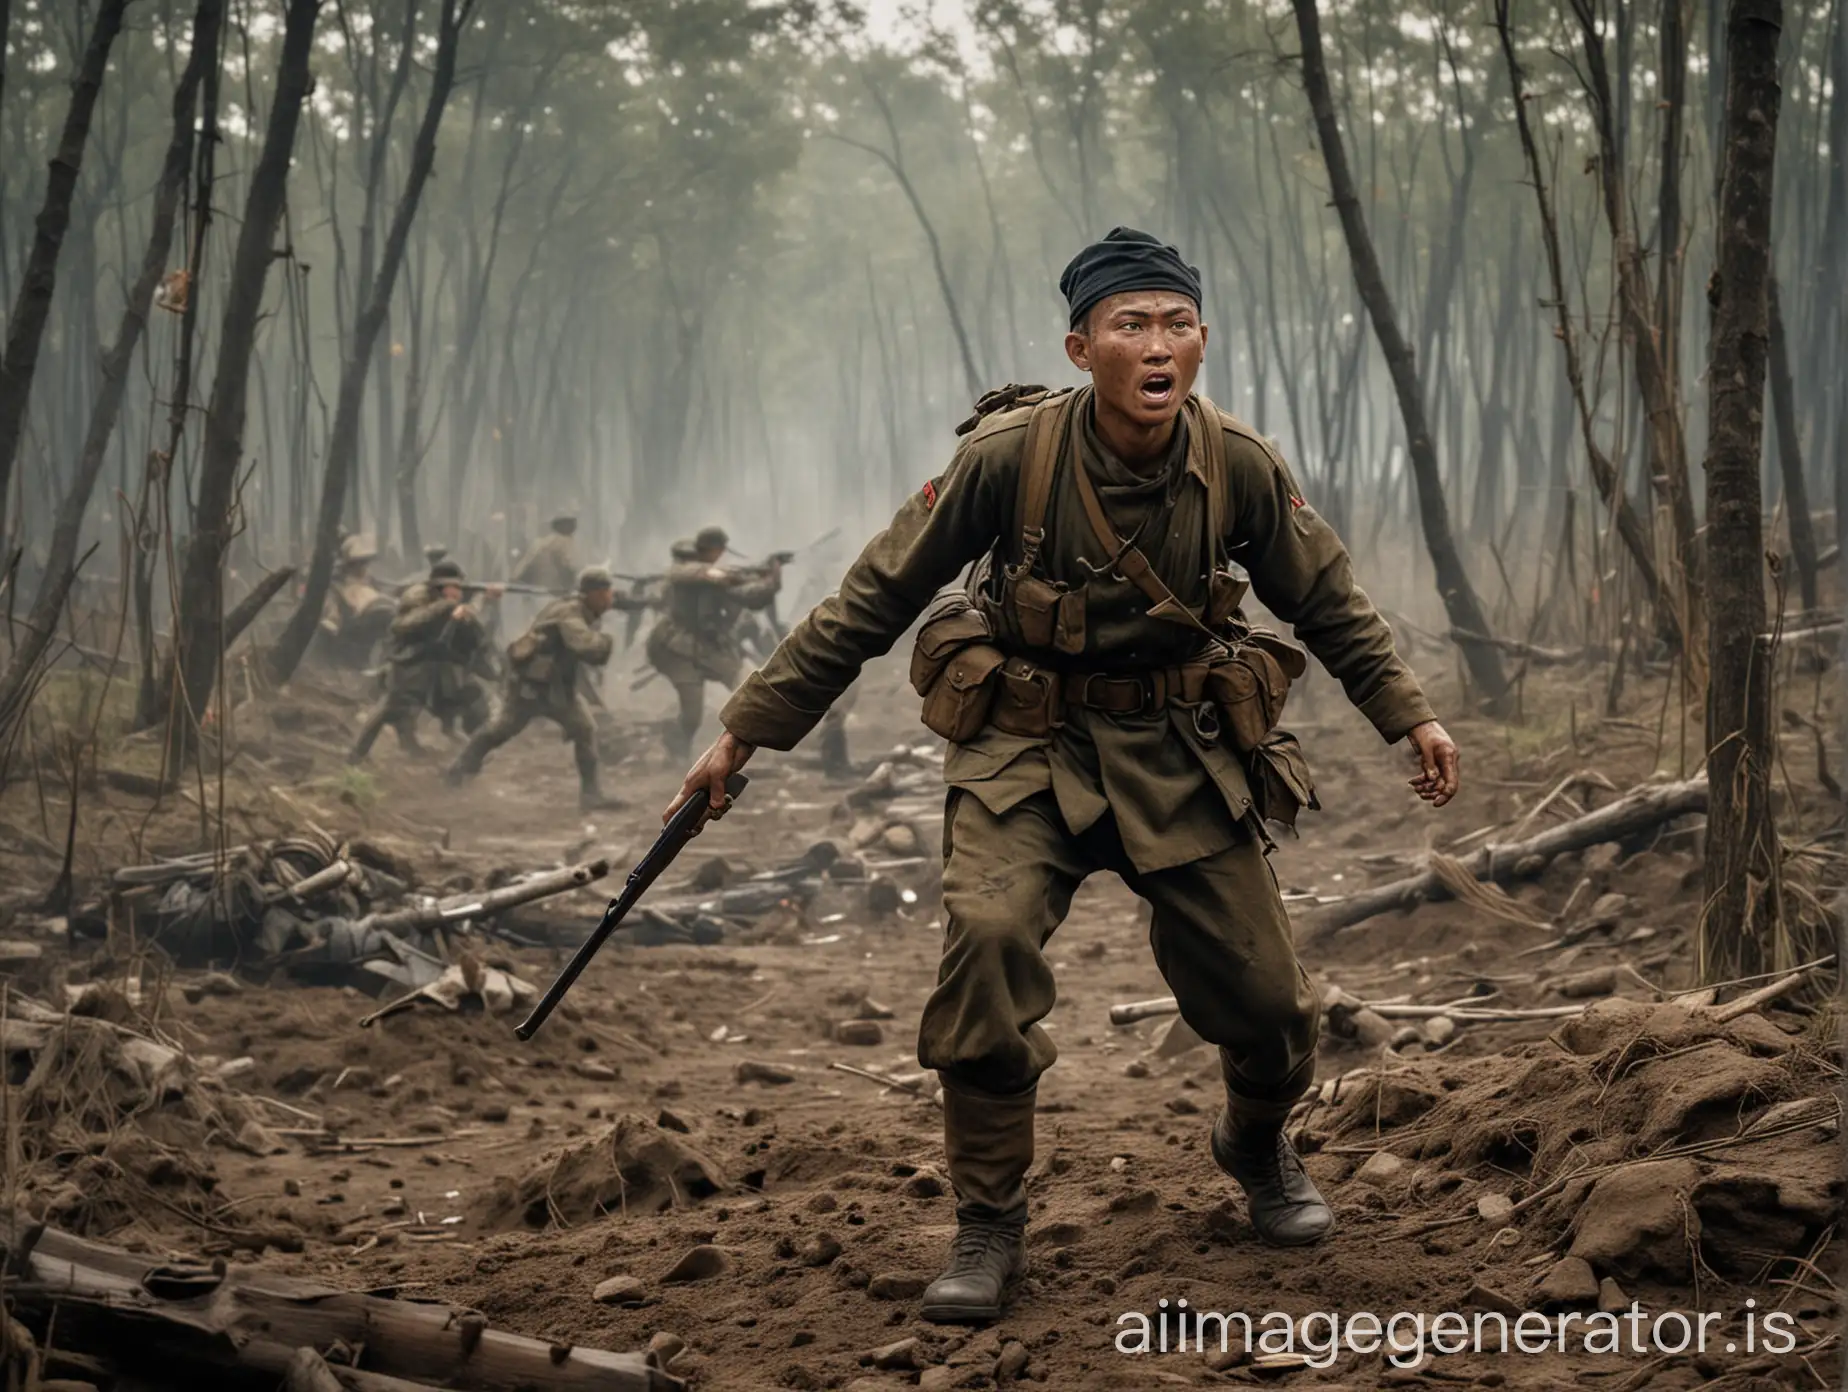 Courage of Cut Nyak Dien in AttacknPortray Cut Nyak Dien at the front line of attack against Dutch position, with an expression full of bravery and background of fierce battle.